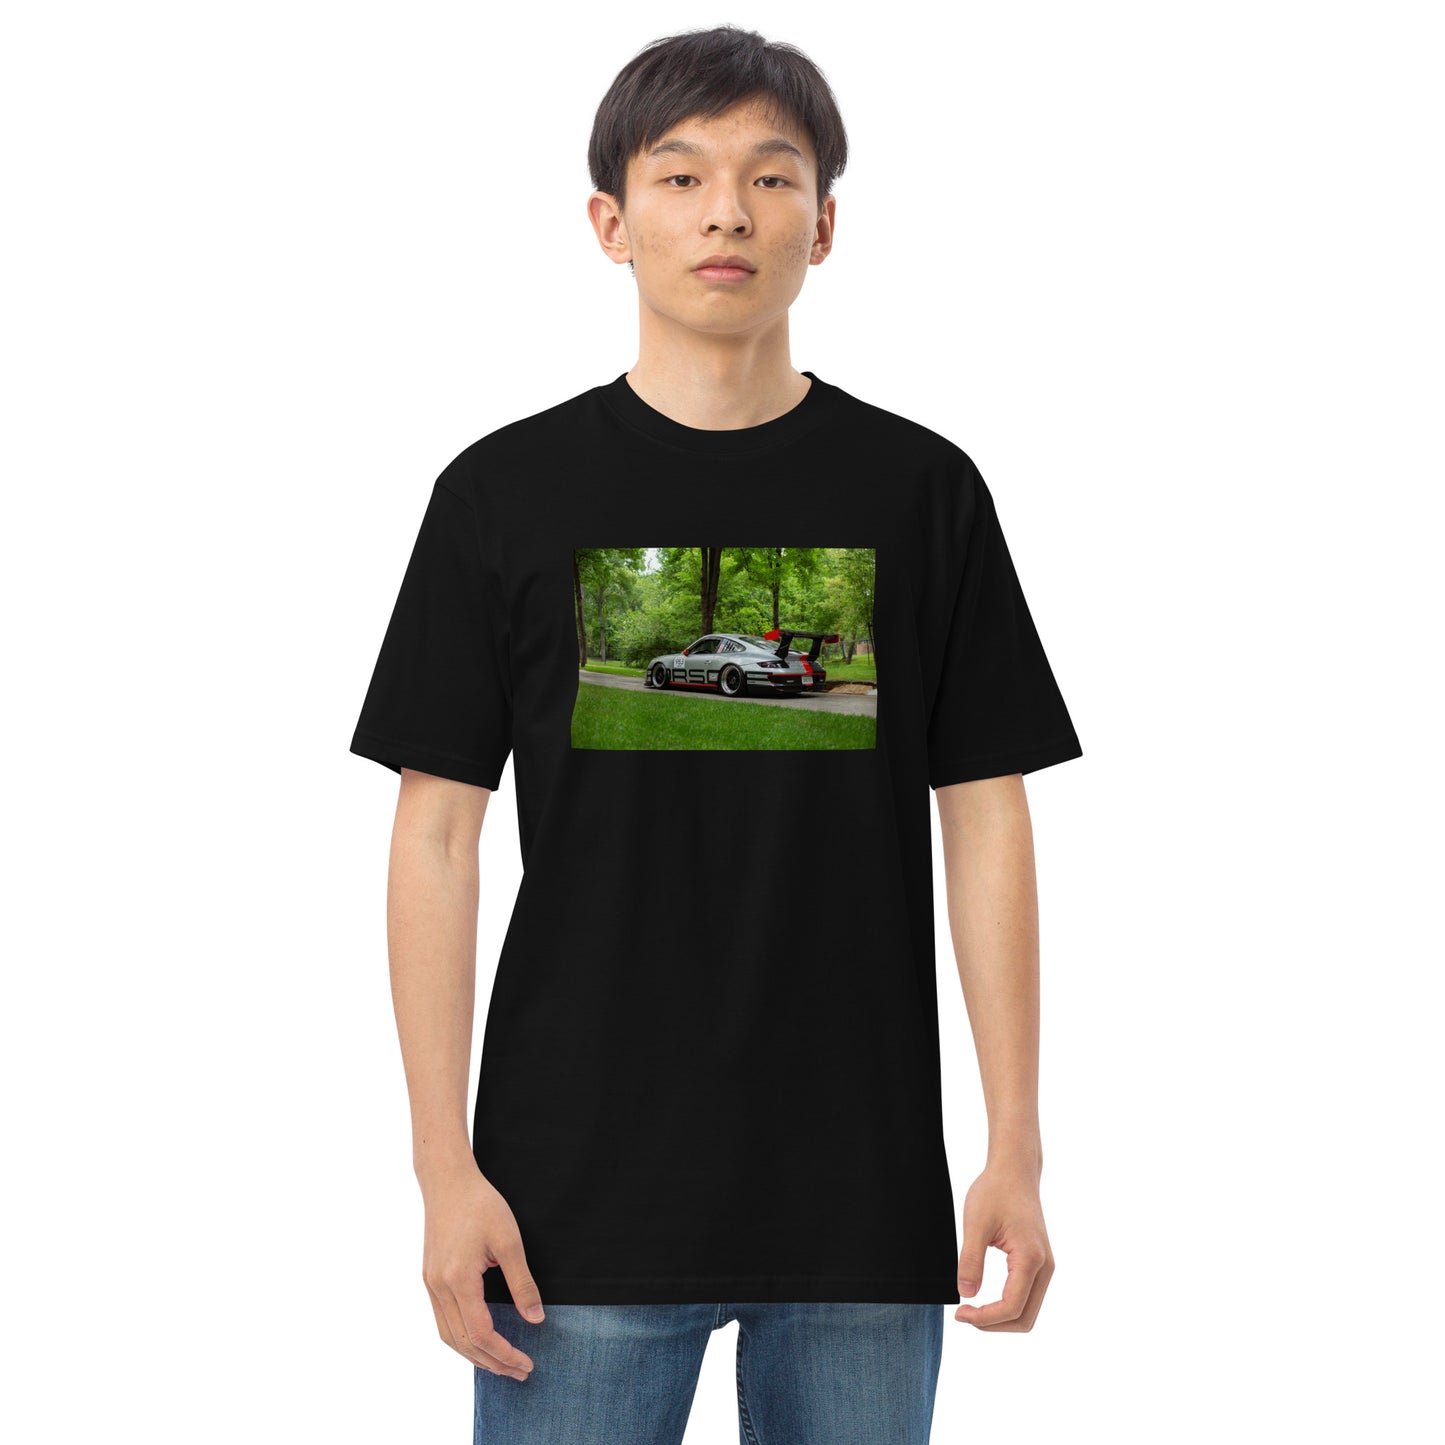 The Freddy Graphic Photo Tee